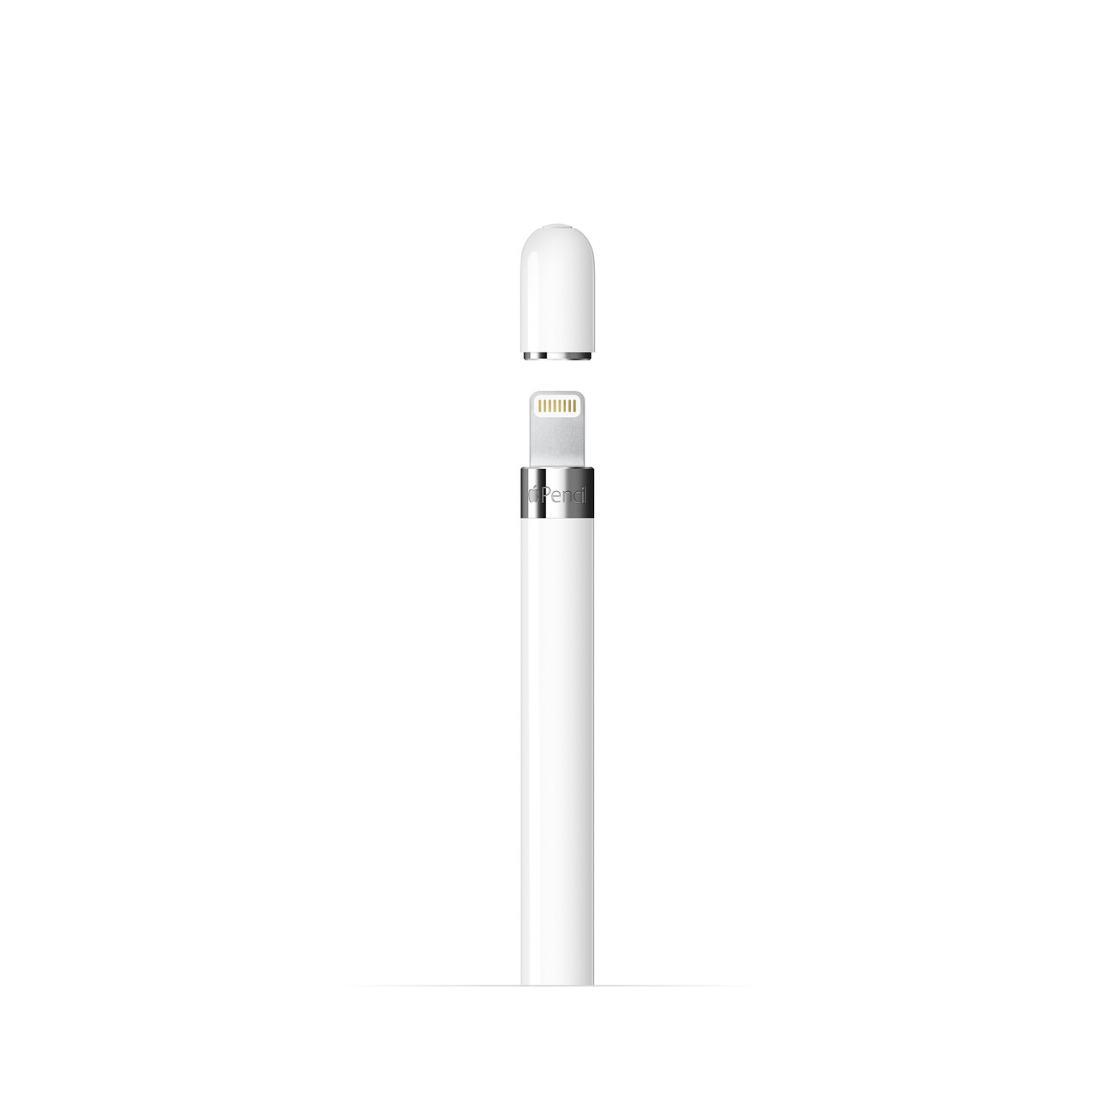 Apple Pencil 1st Generation for Apple iPad, iPad Air, and iPad Pro - QuickTech.in